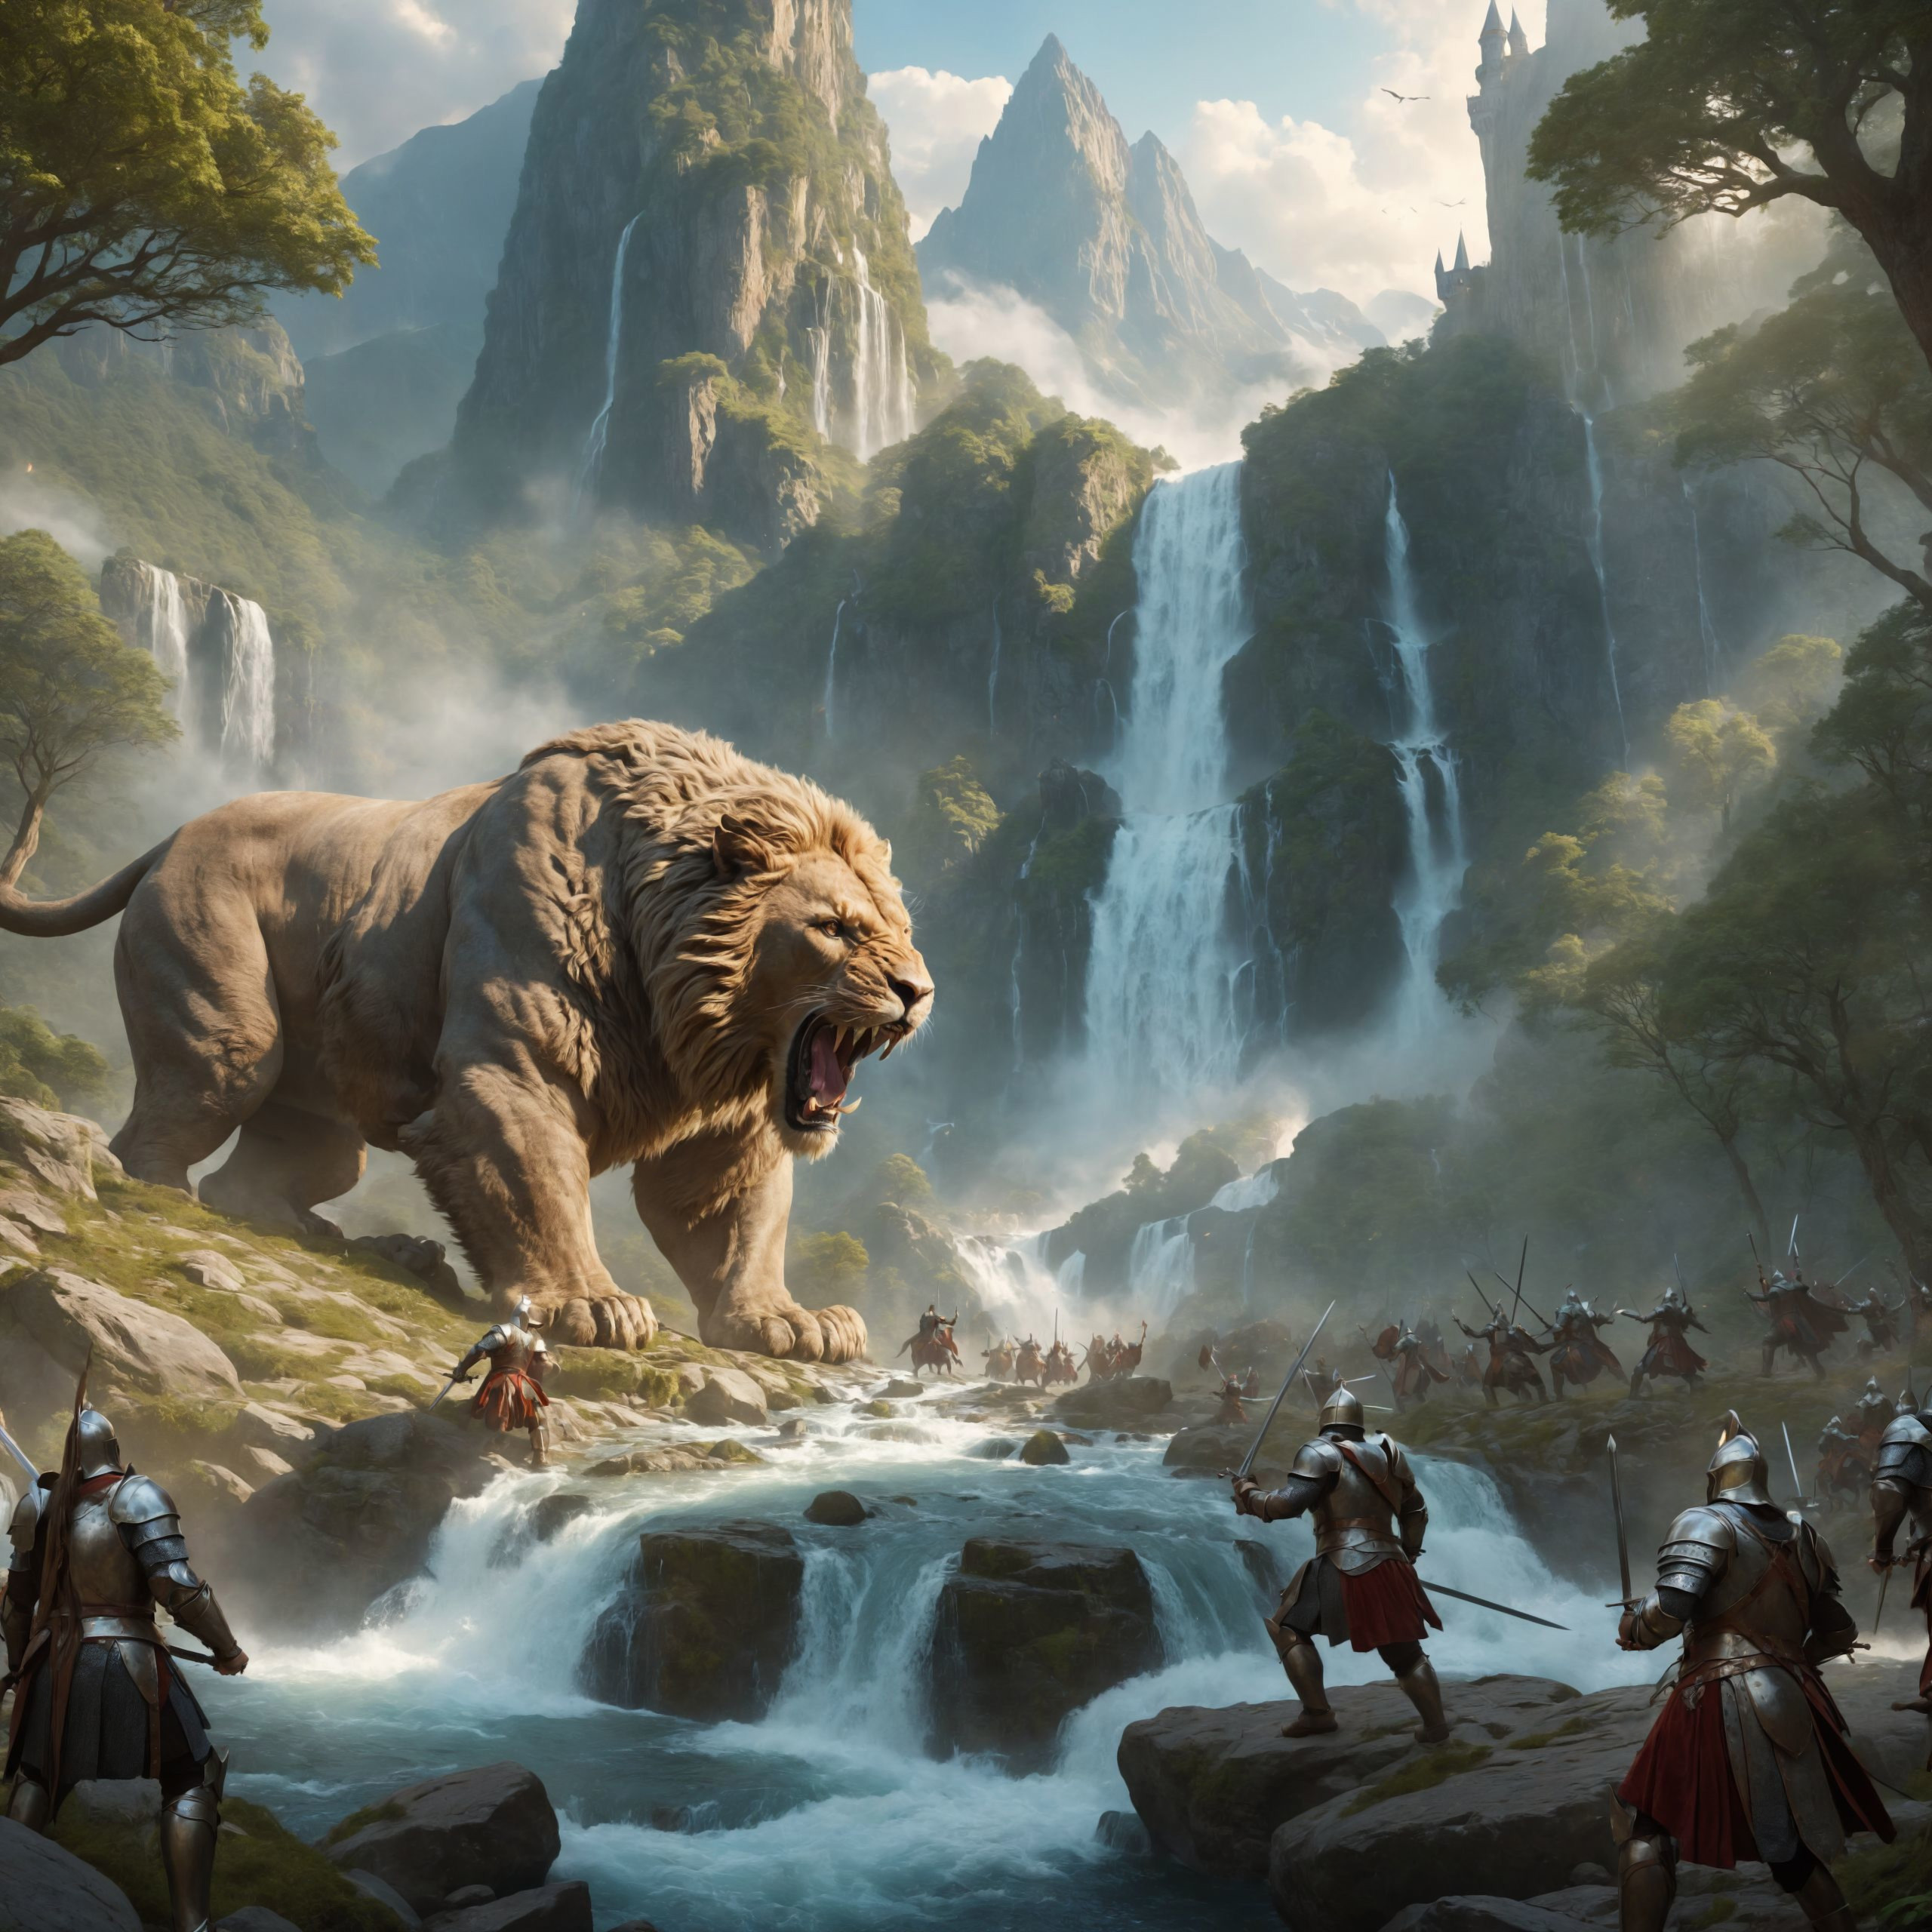 A painting of a lion standing in the water, with a group of knights approaching it.